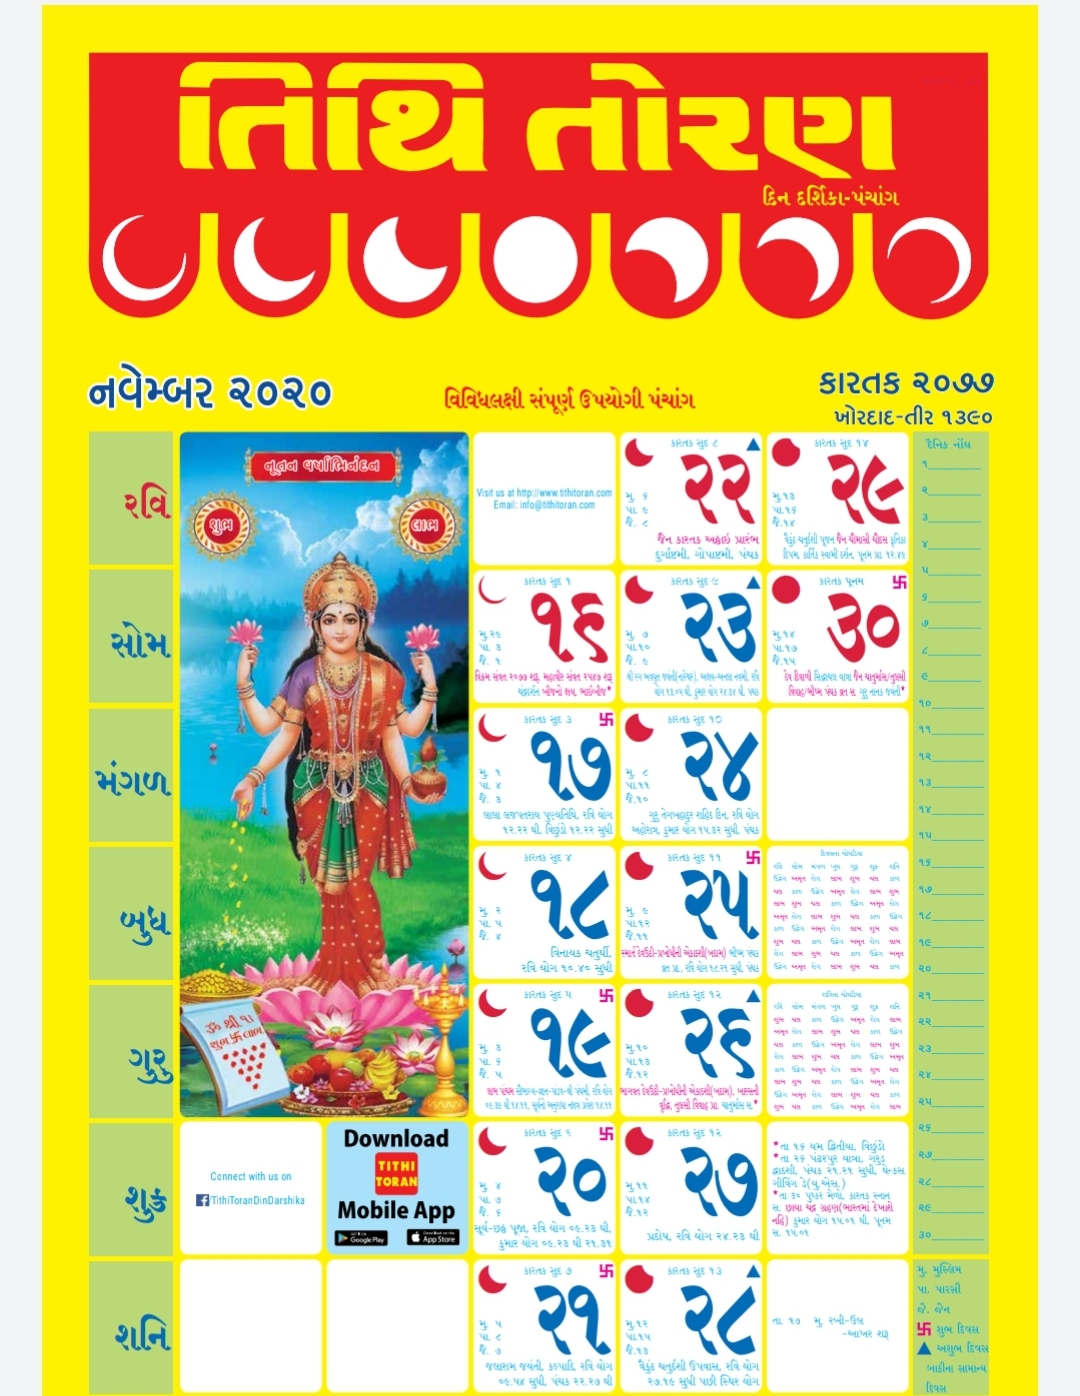 Hindu Full Year Calendar 2021 India With Holidays And Festivals / 20